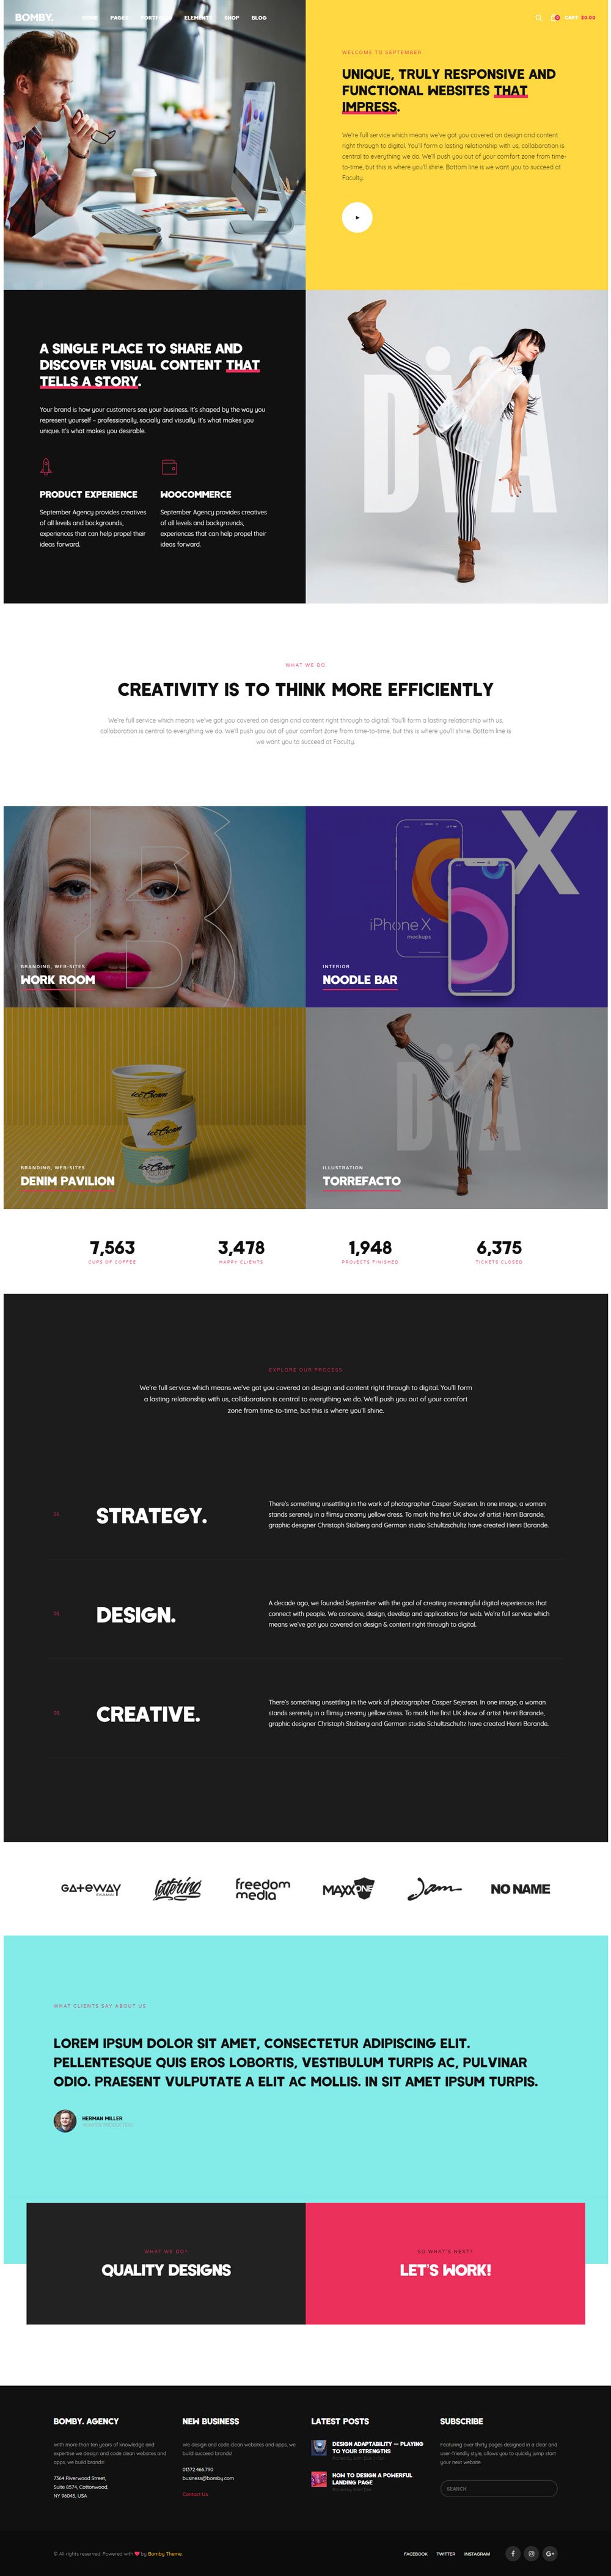 Best-WordPress-Themes-and-Web-Design-for-Creatives-006